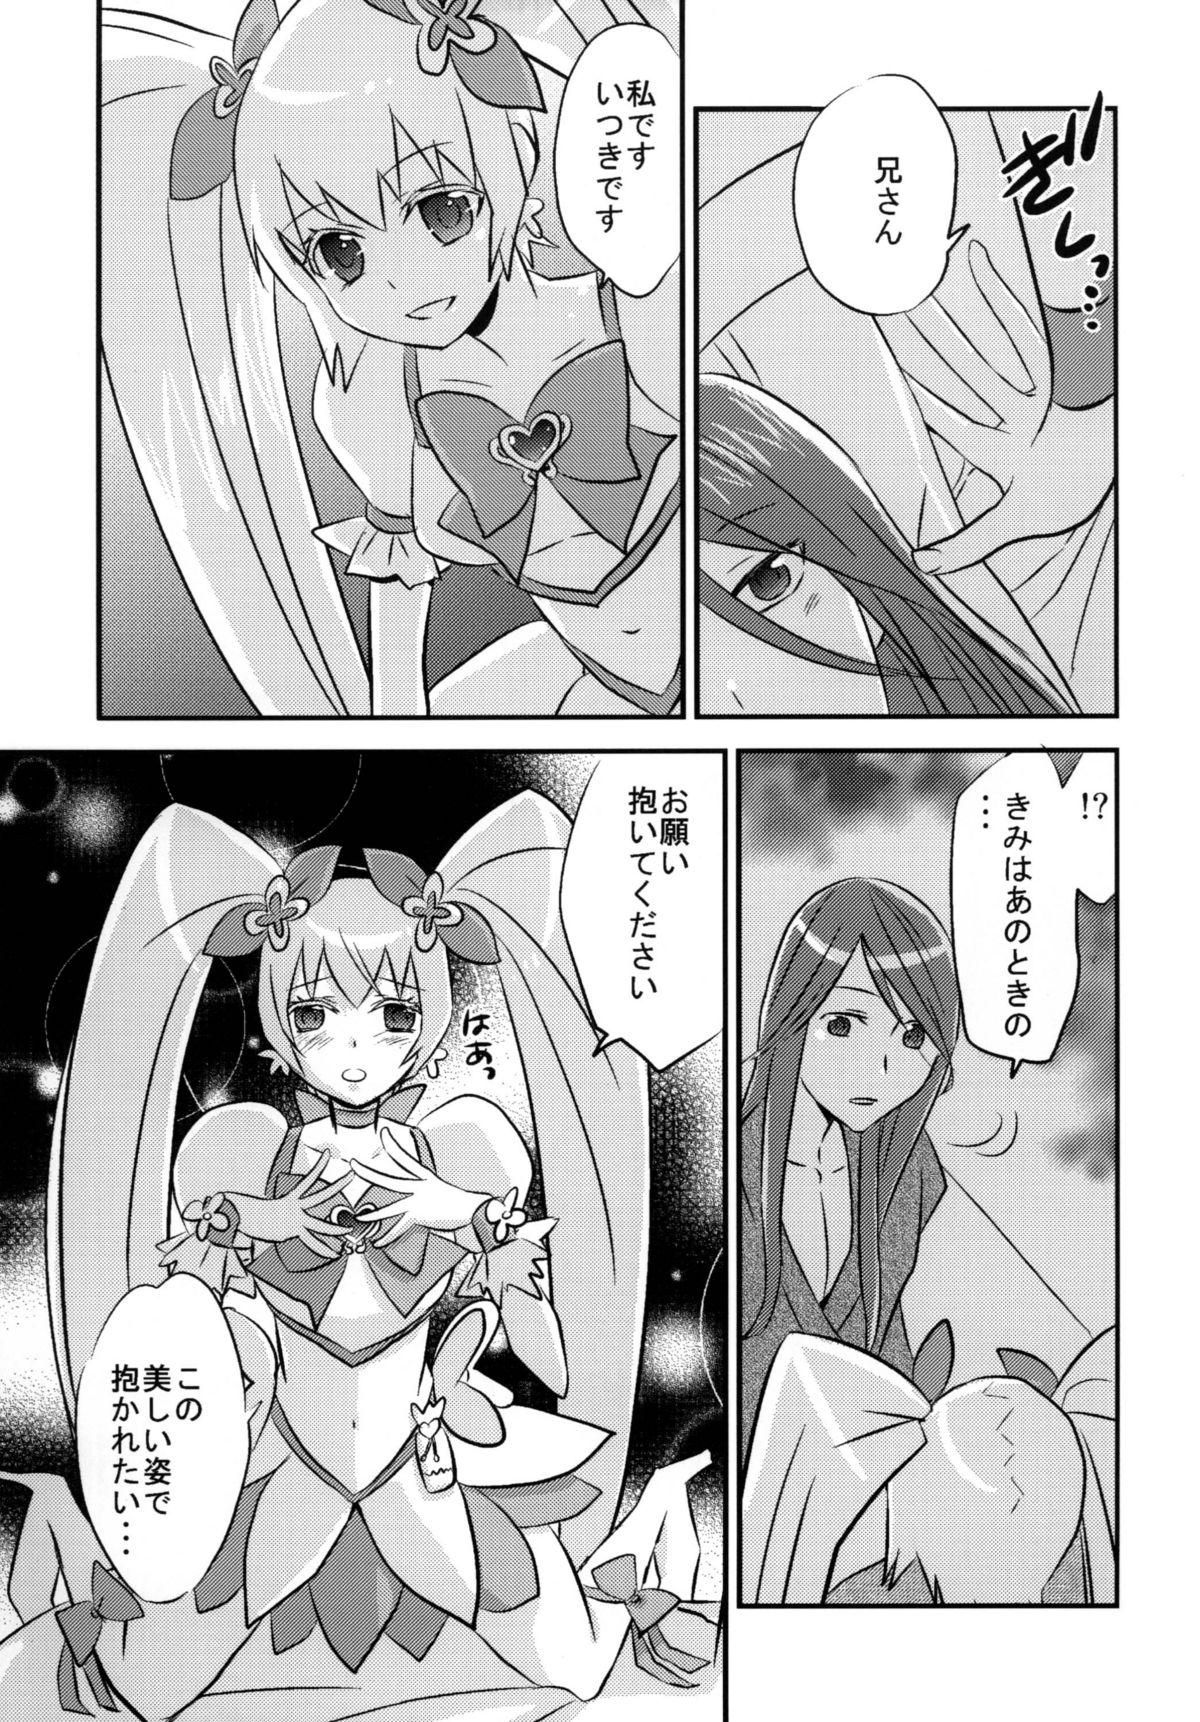 Oldvsyoung Munekyun Sunshine - Heartcatch precure Belly - Page 8